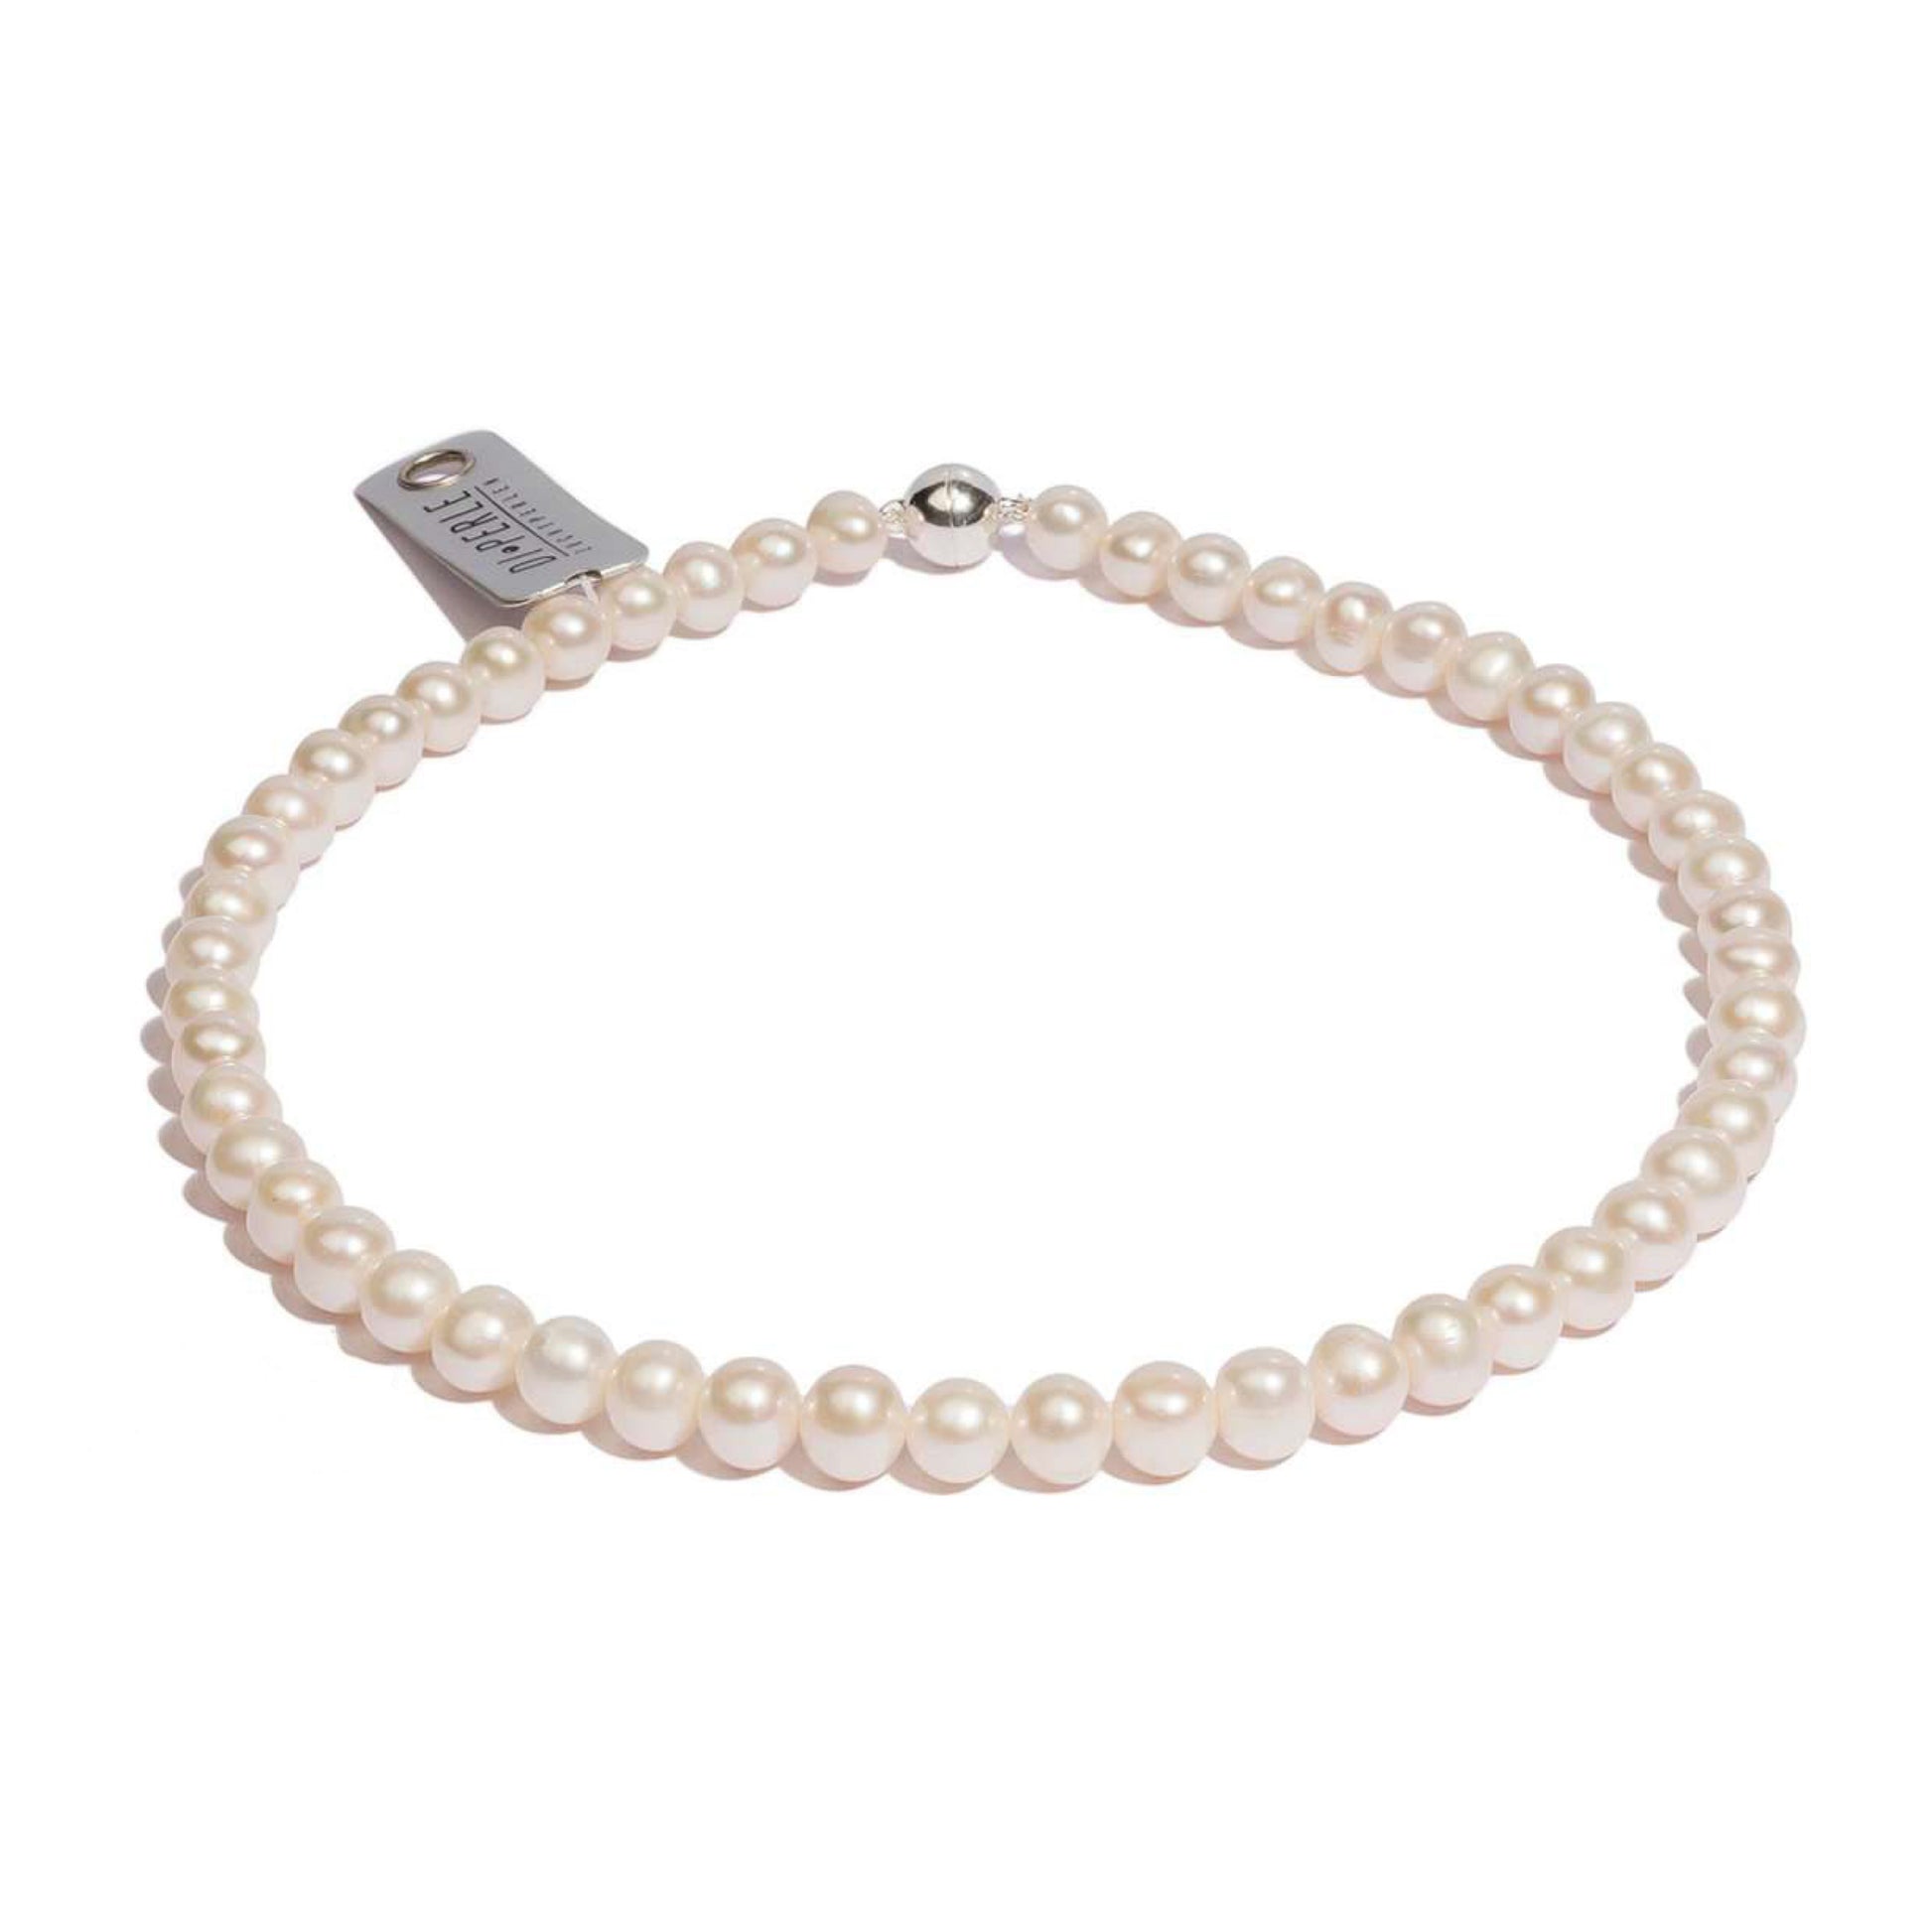 Cultured Freshwater Pearl Necklace - 8-9mm|42cm - John Ross Jewellers